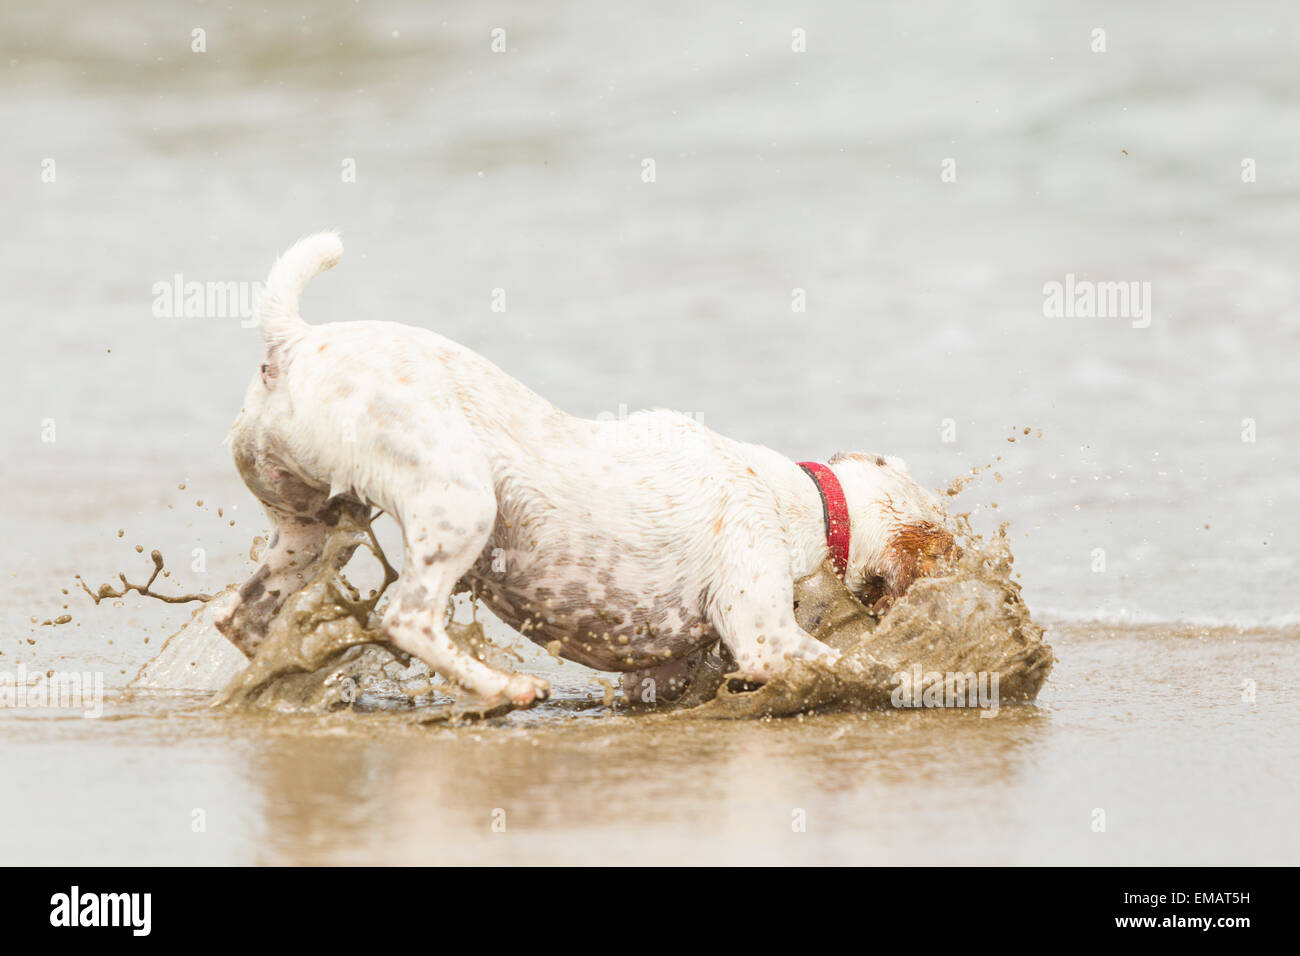 Jack Russell terrier stopping on the ball, high speed action shot Stock Photo